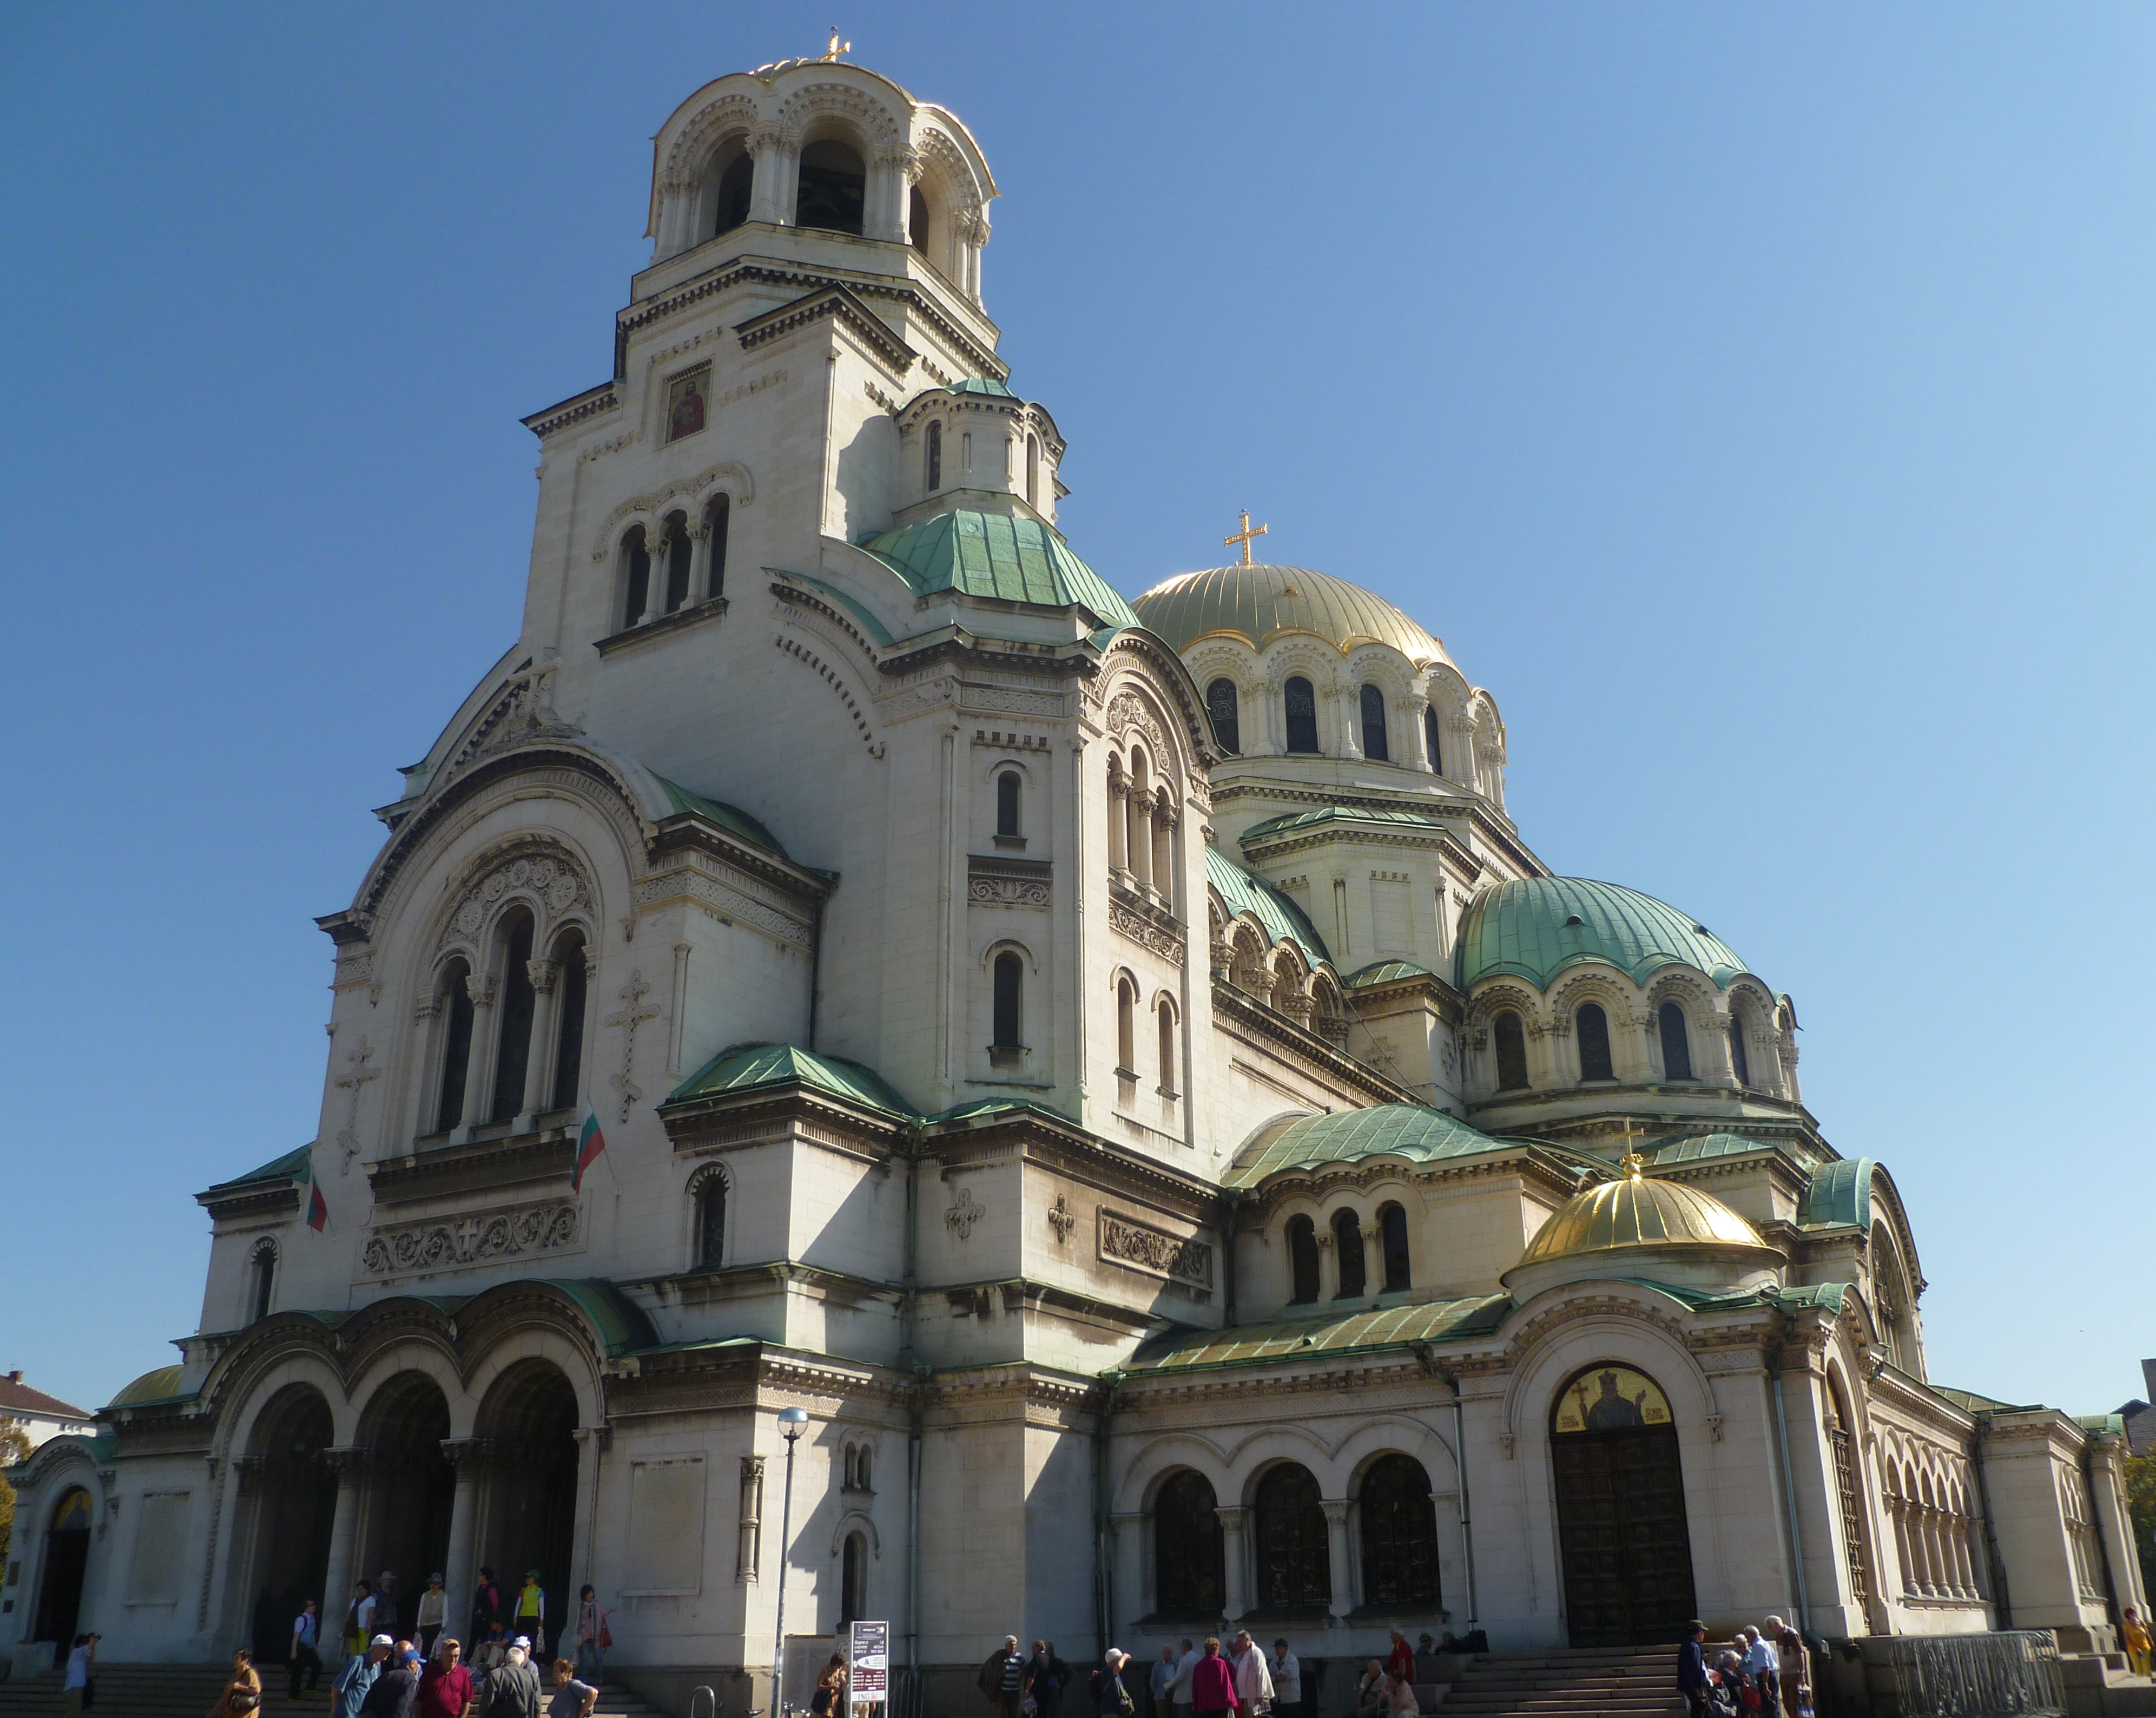 Sofia city hall bans parking around Parliament, cathedral | The ...